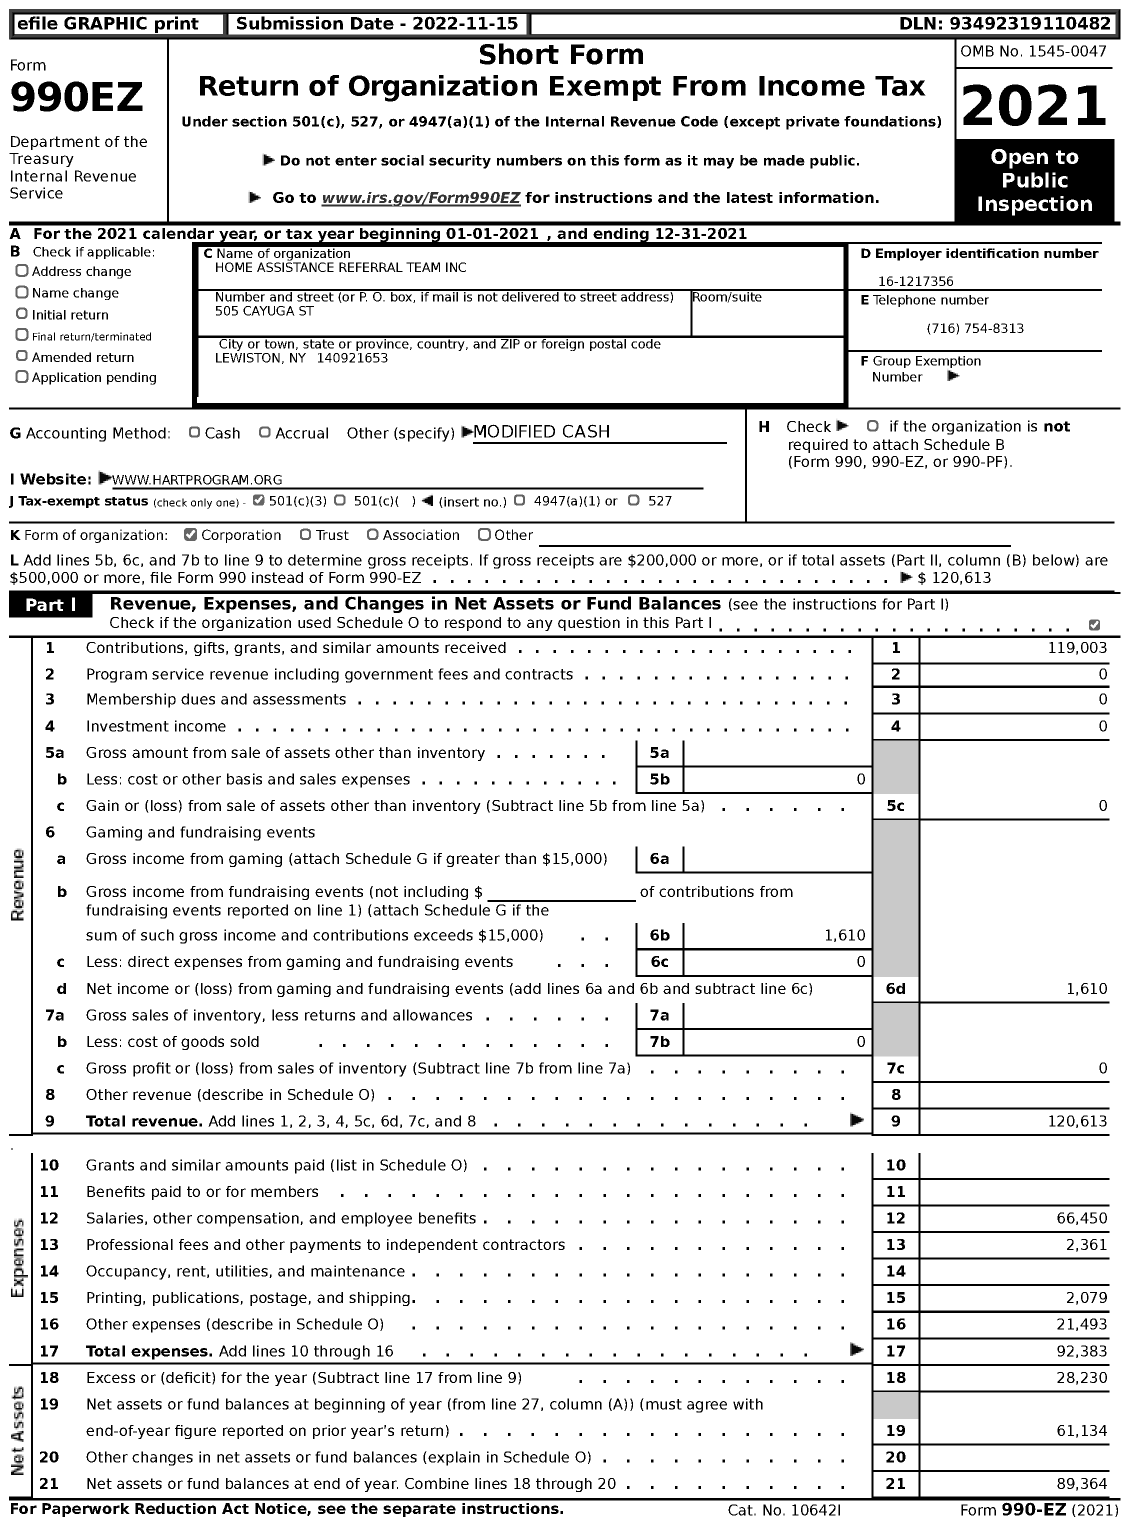 Image of first page of 2021 Form 990EZ for Home Assistance Referral Team